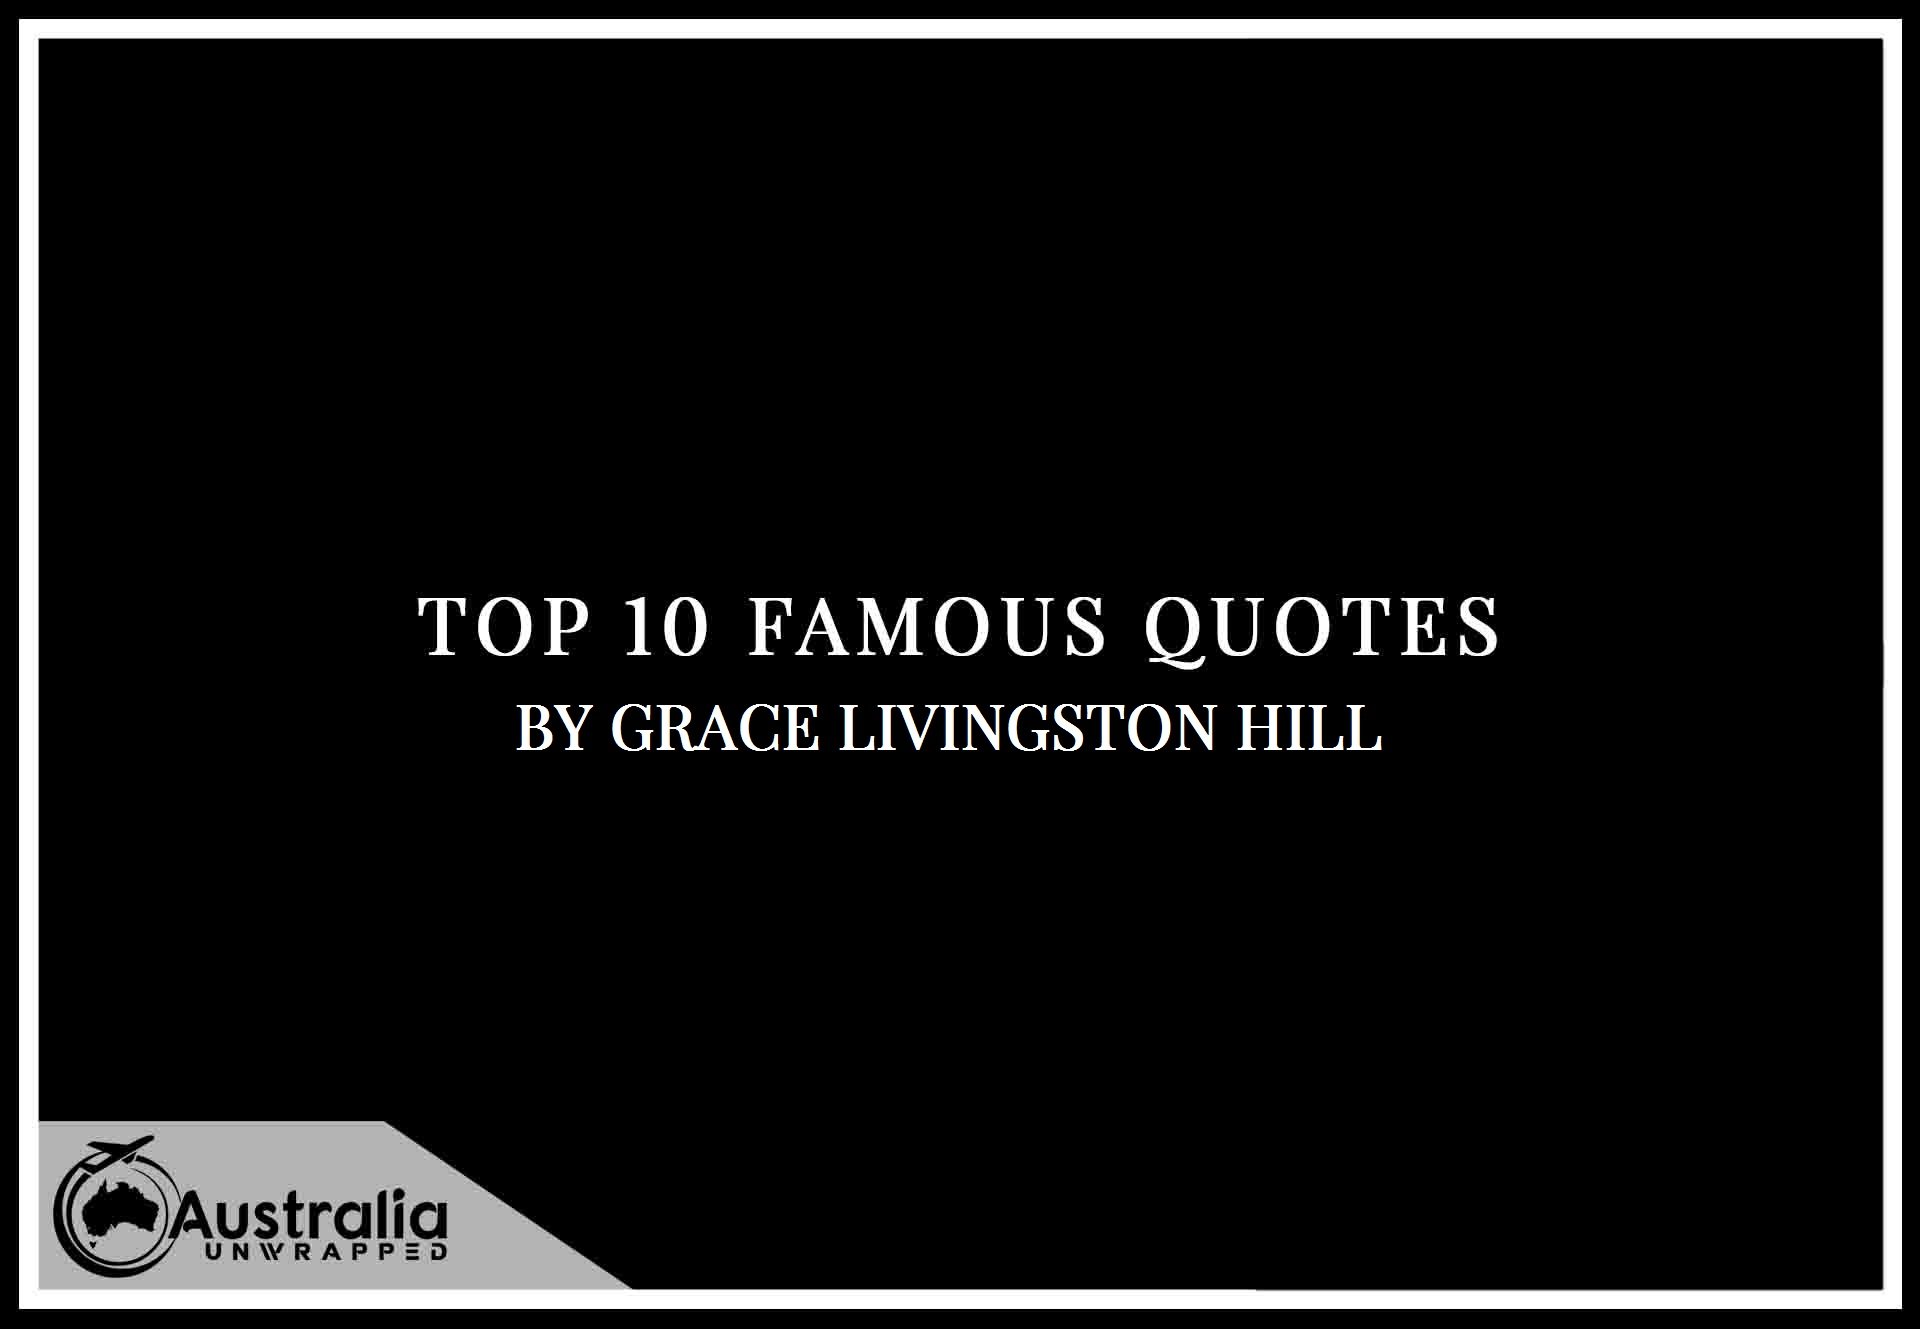 Grace Livingston Hill’s Top 10 Popular and Famous Quotes